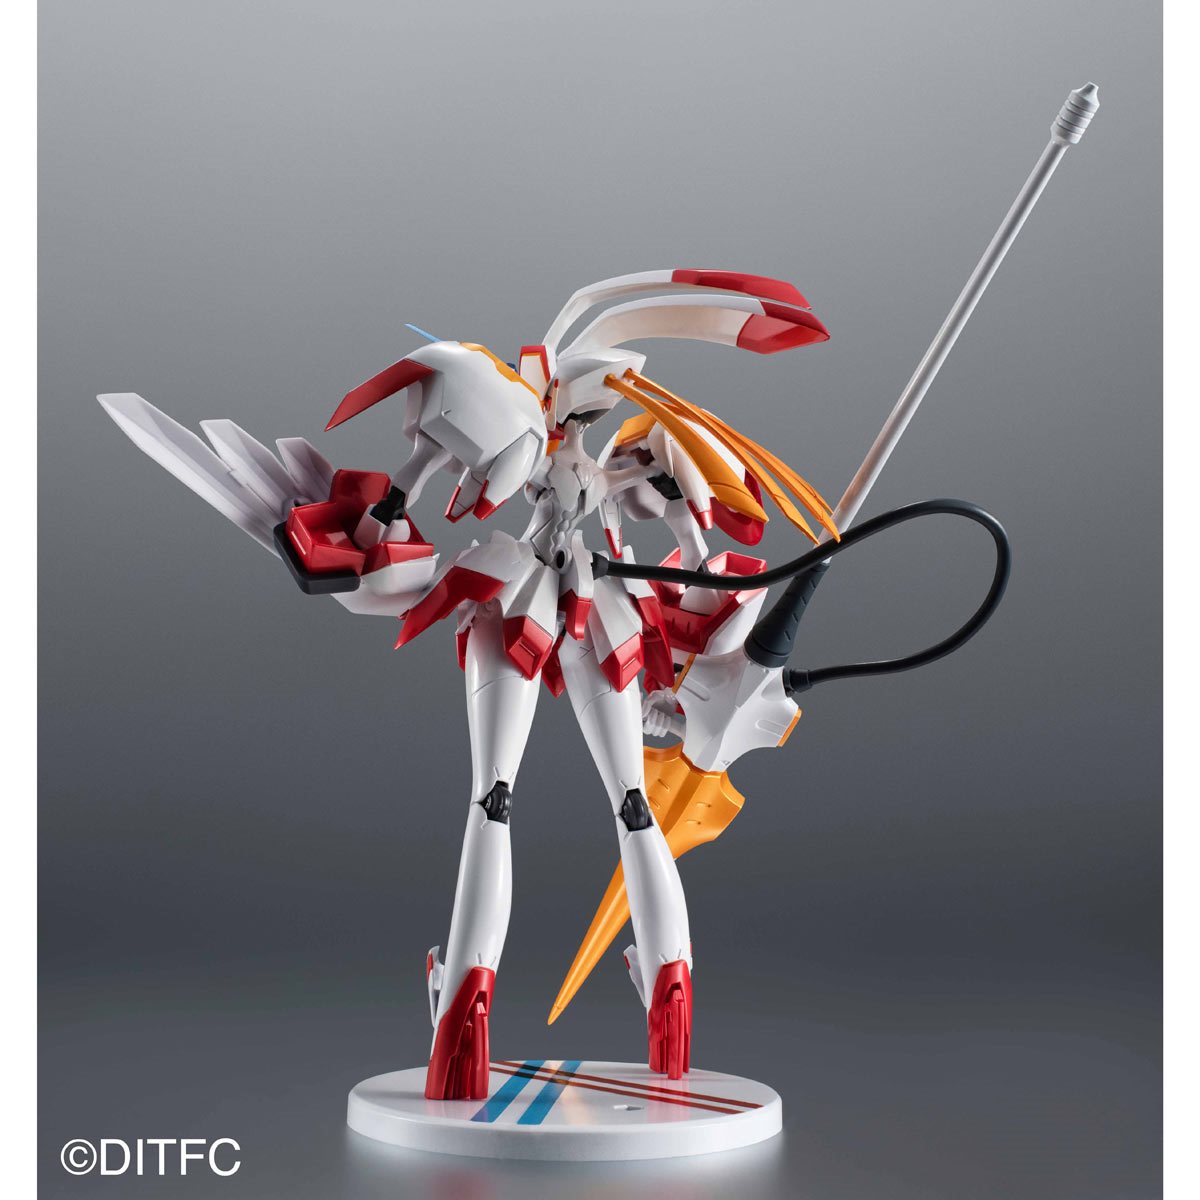 Zero Two: For My Darling Collectible Figure